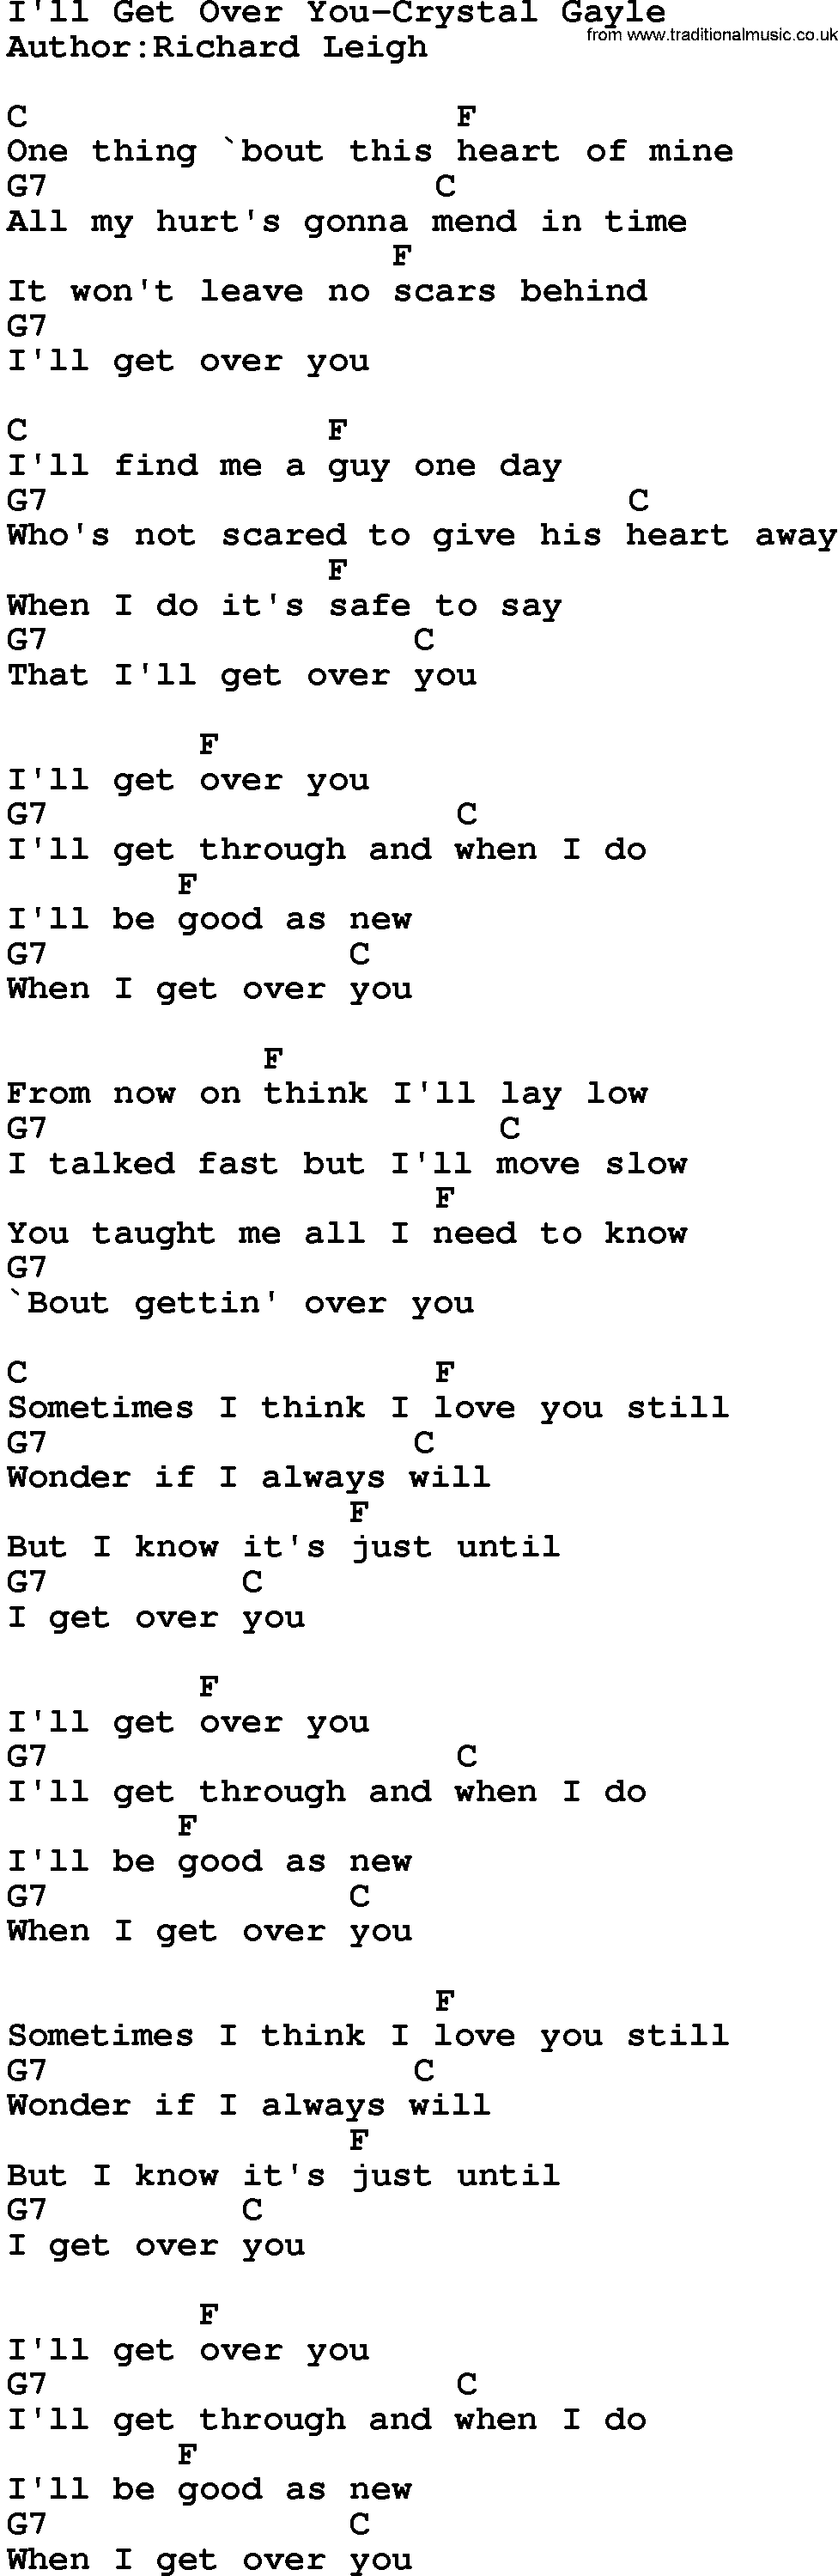 Country music song: I'll Get Over You-Crystal Gayle lyrics and chords